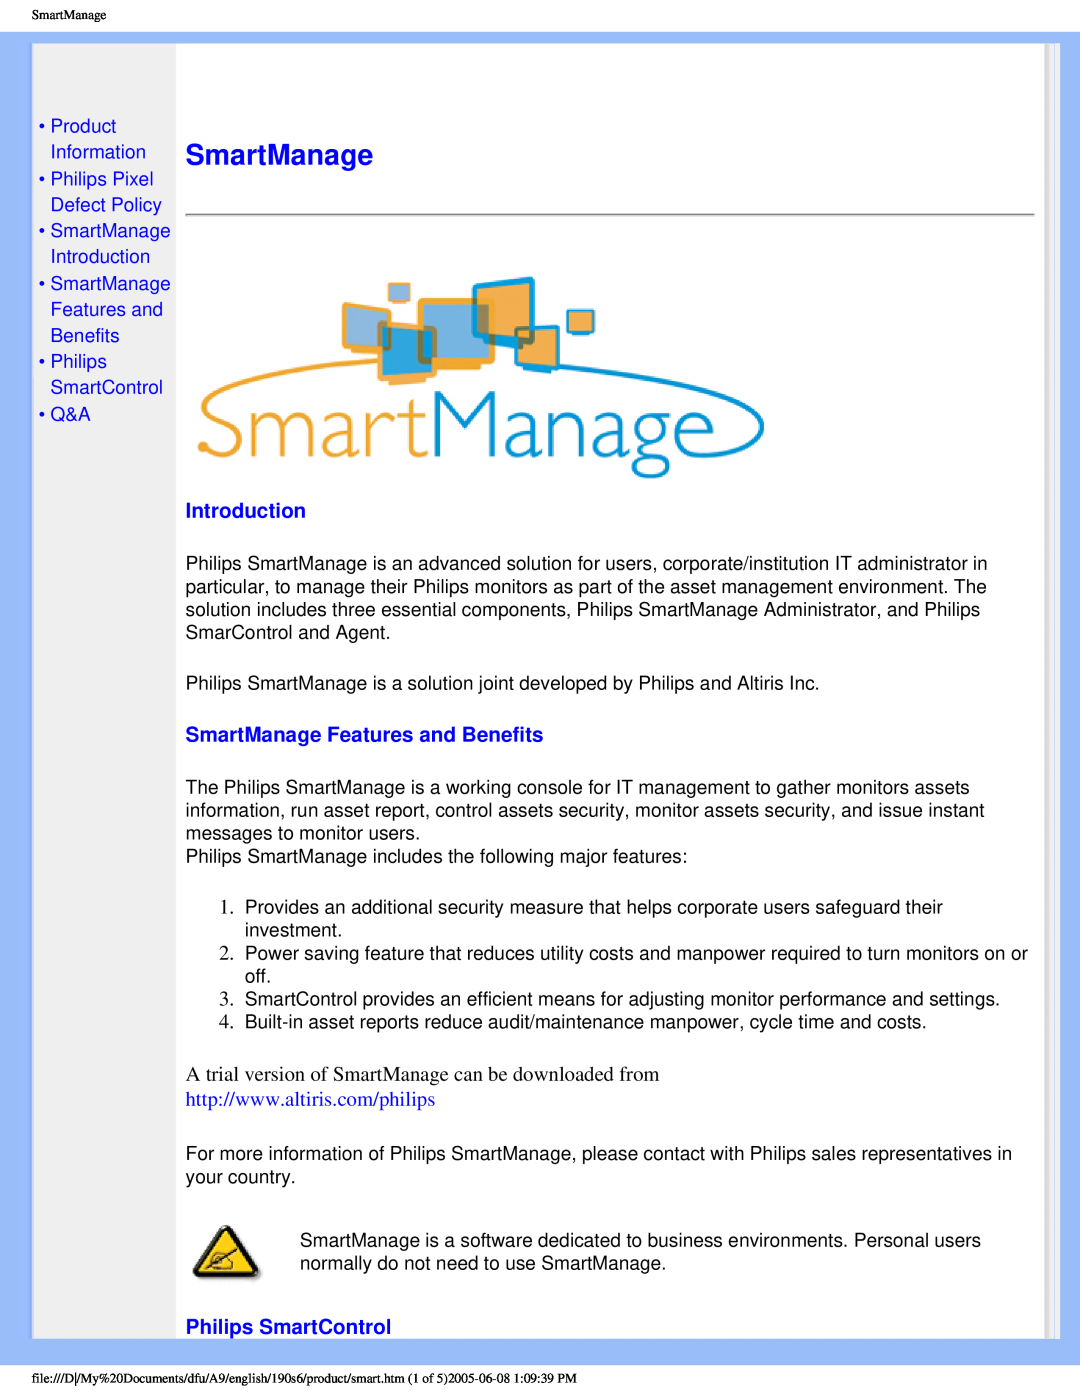 Philips 190P6 user manual SmartManage Features and Benefits, Philips SmartControl, SmartManage Introduction 